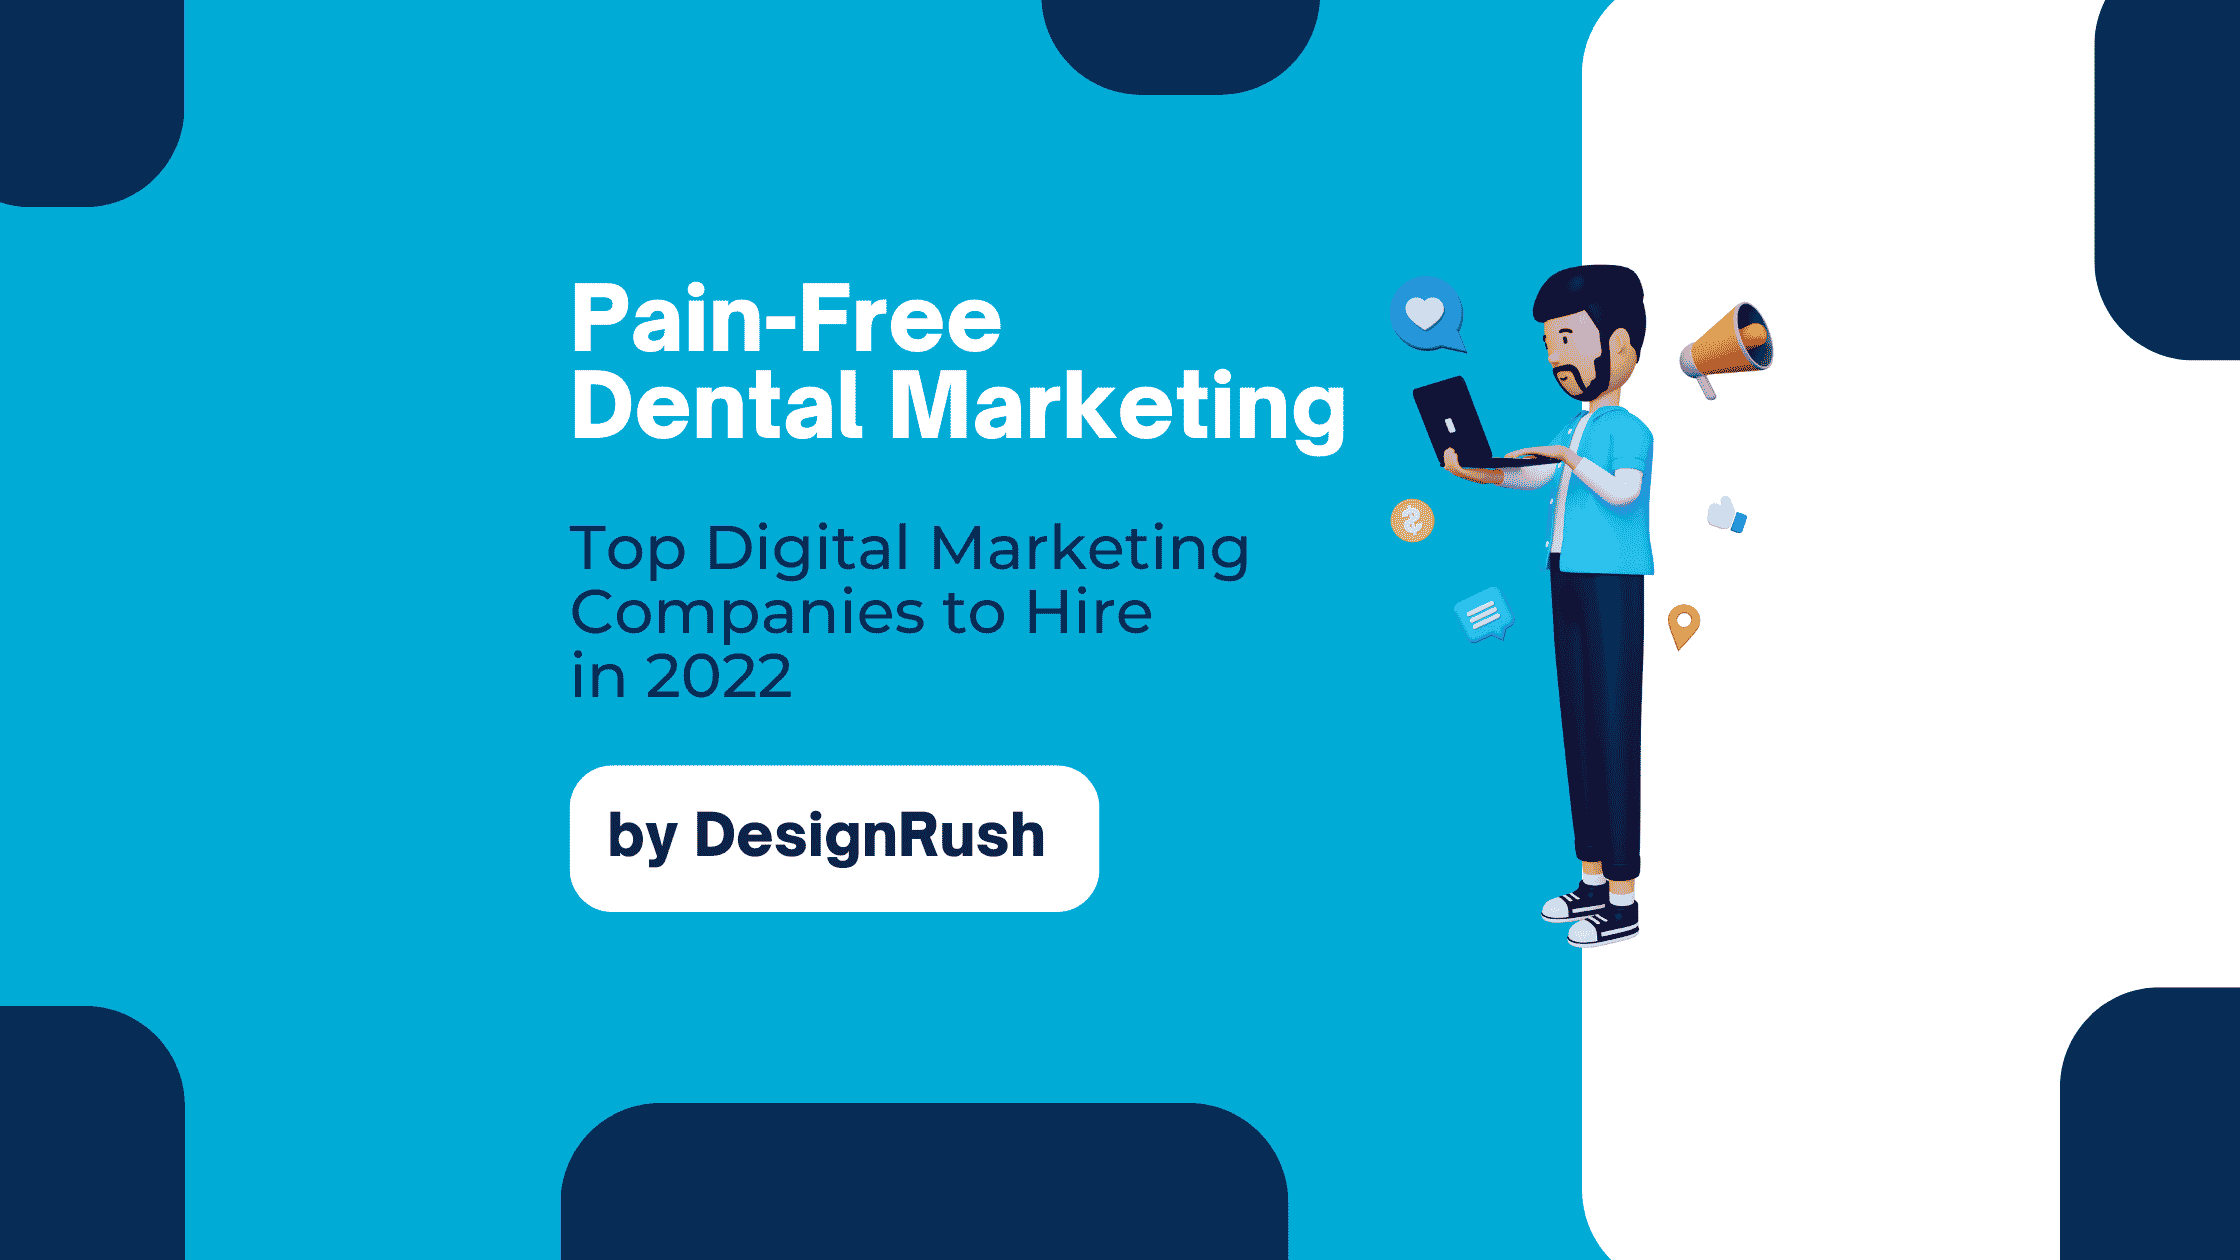 Pain-Free Dental Marketing top digital marketing companies to hire in 2022 by DesignRush